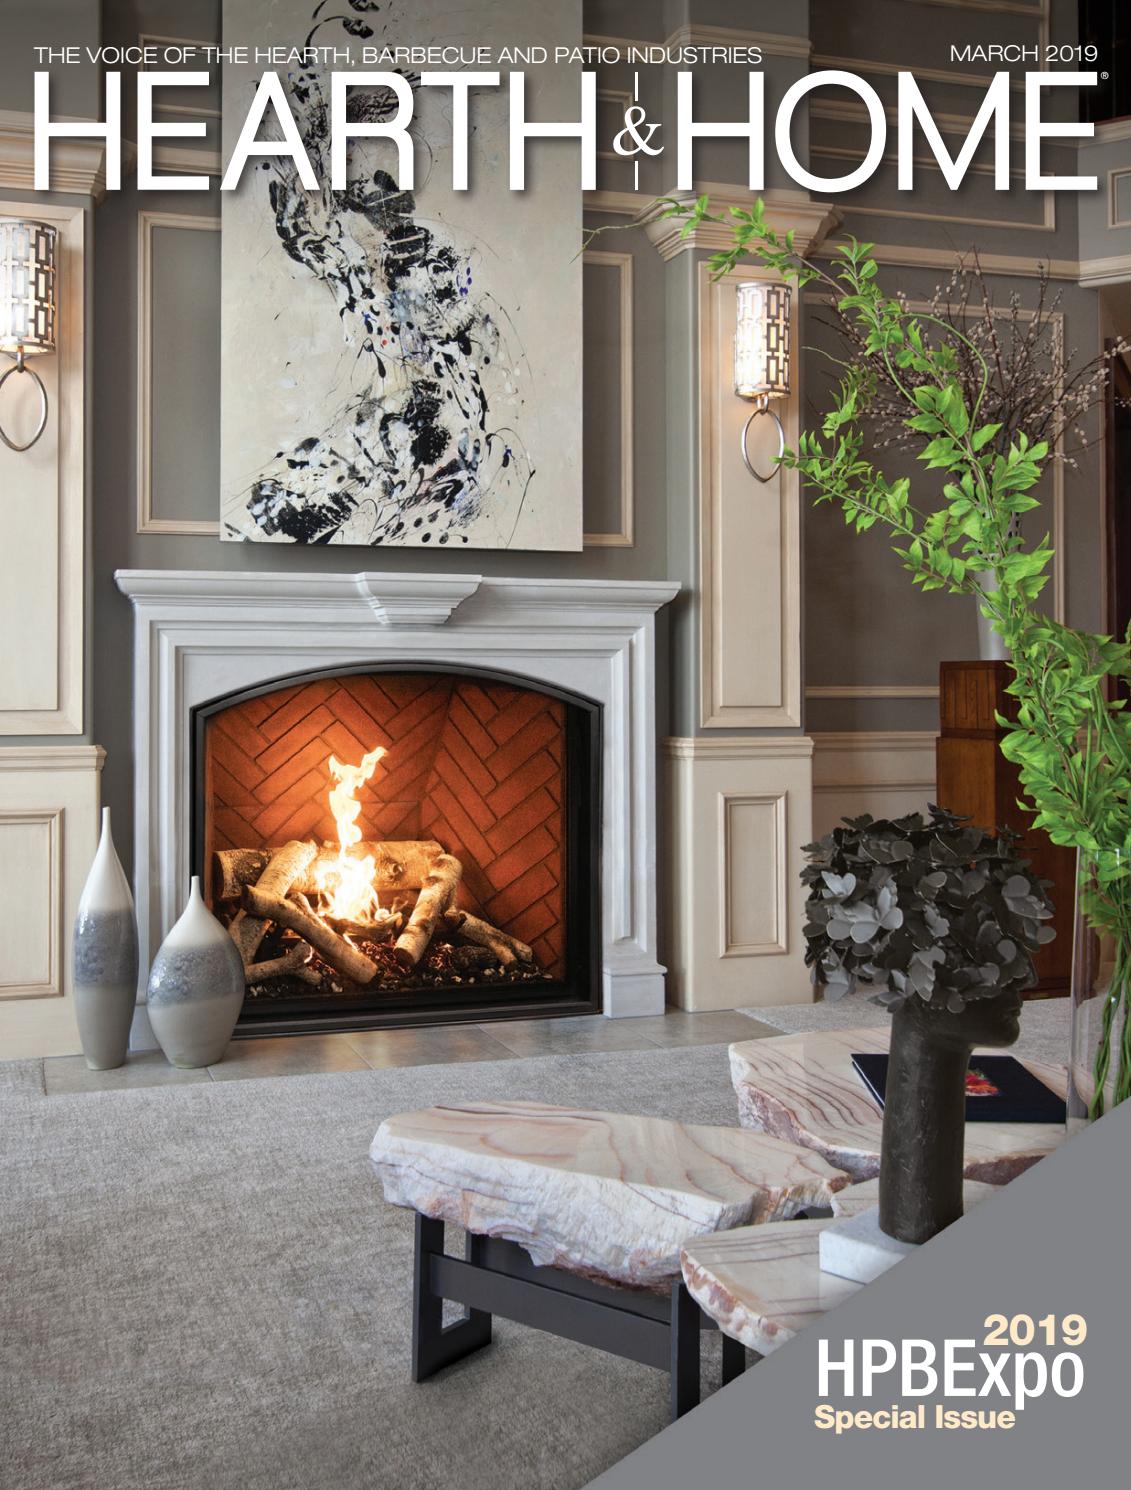 Twin Star Electric Fireplace Elegant Hearth & Home Magazine – 2019 March issue by Hearth & Home